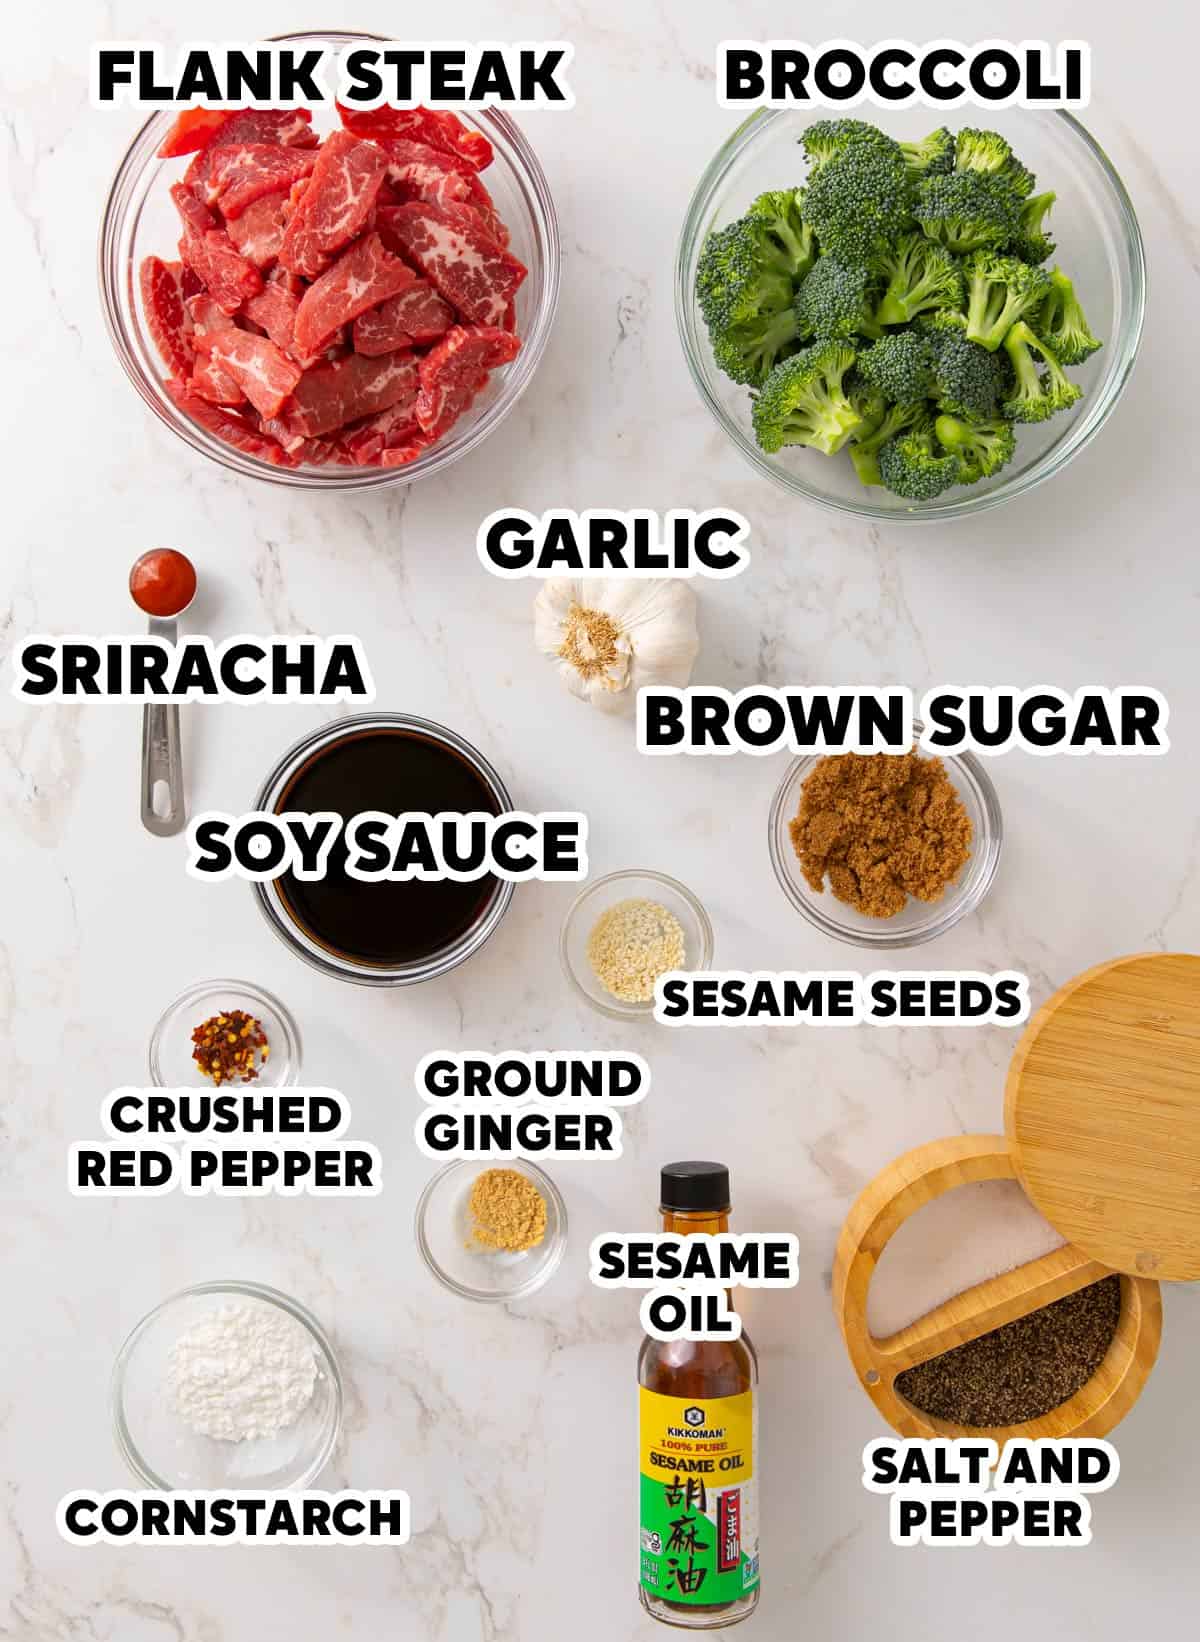 Ingredients for making beef and broccoli stir-fry with overlay text.